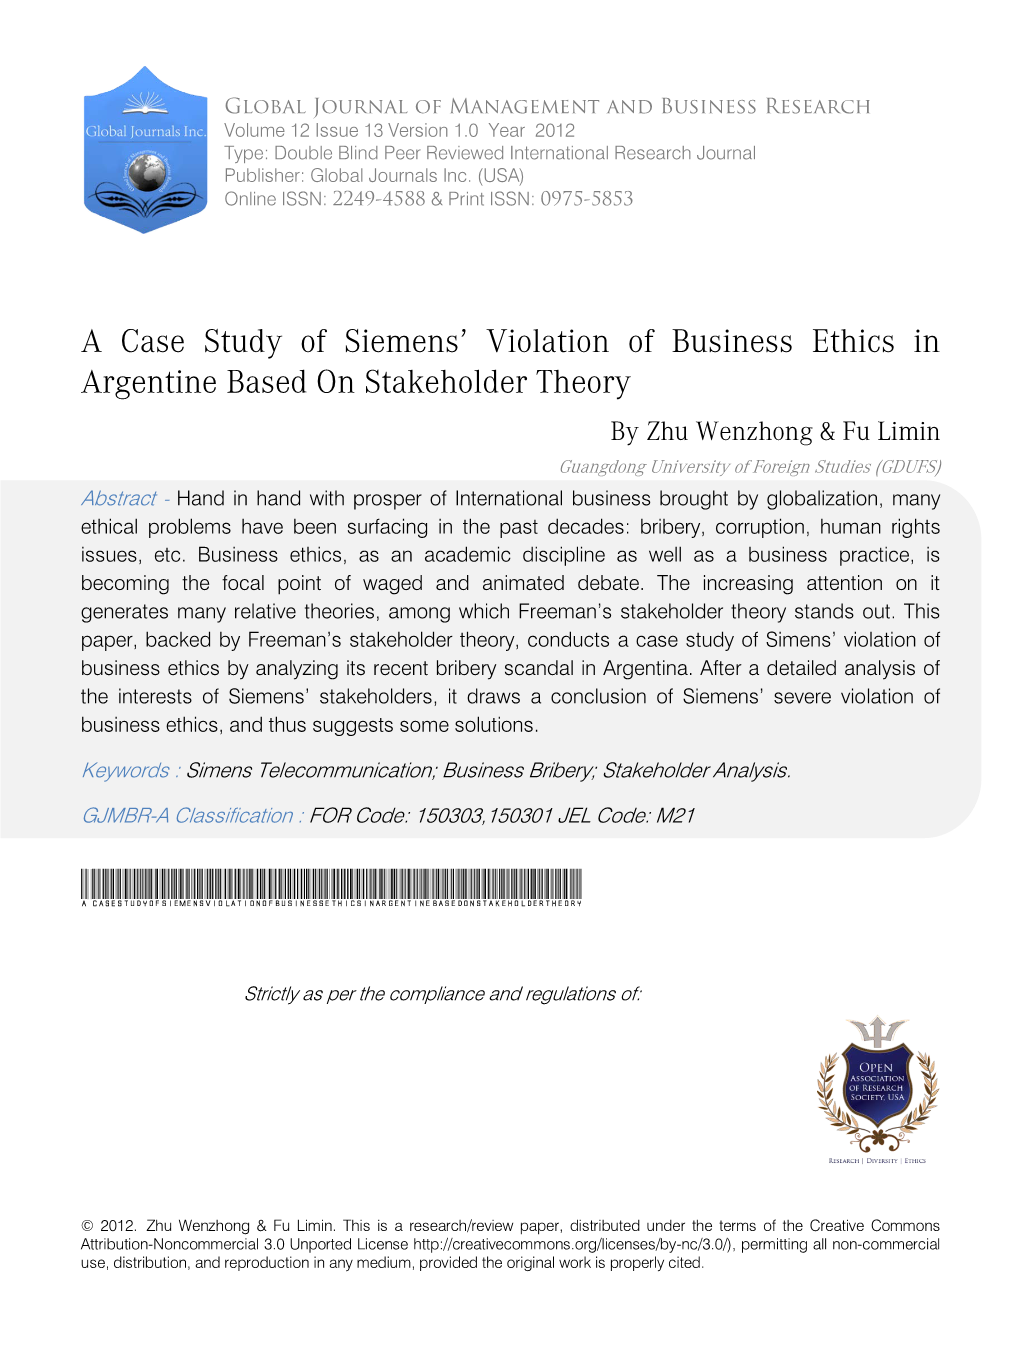 A Case Study of Siemens' Violation of Business Ethics in Argentine Based